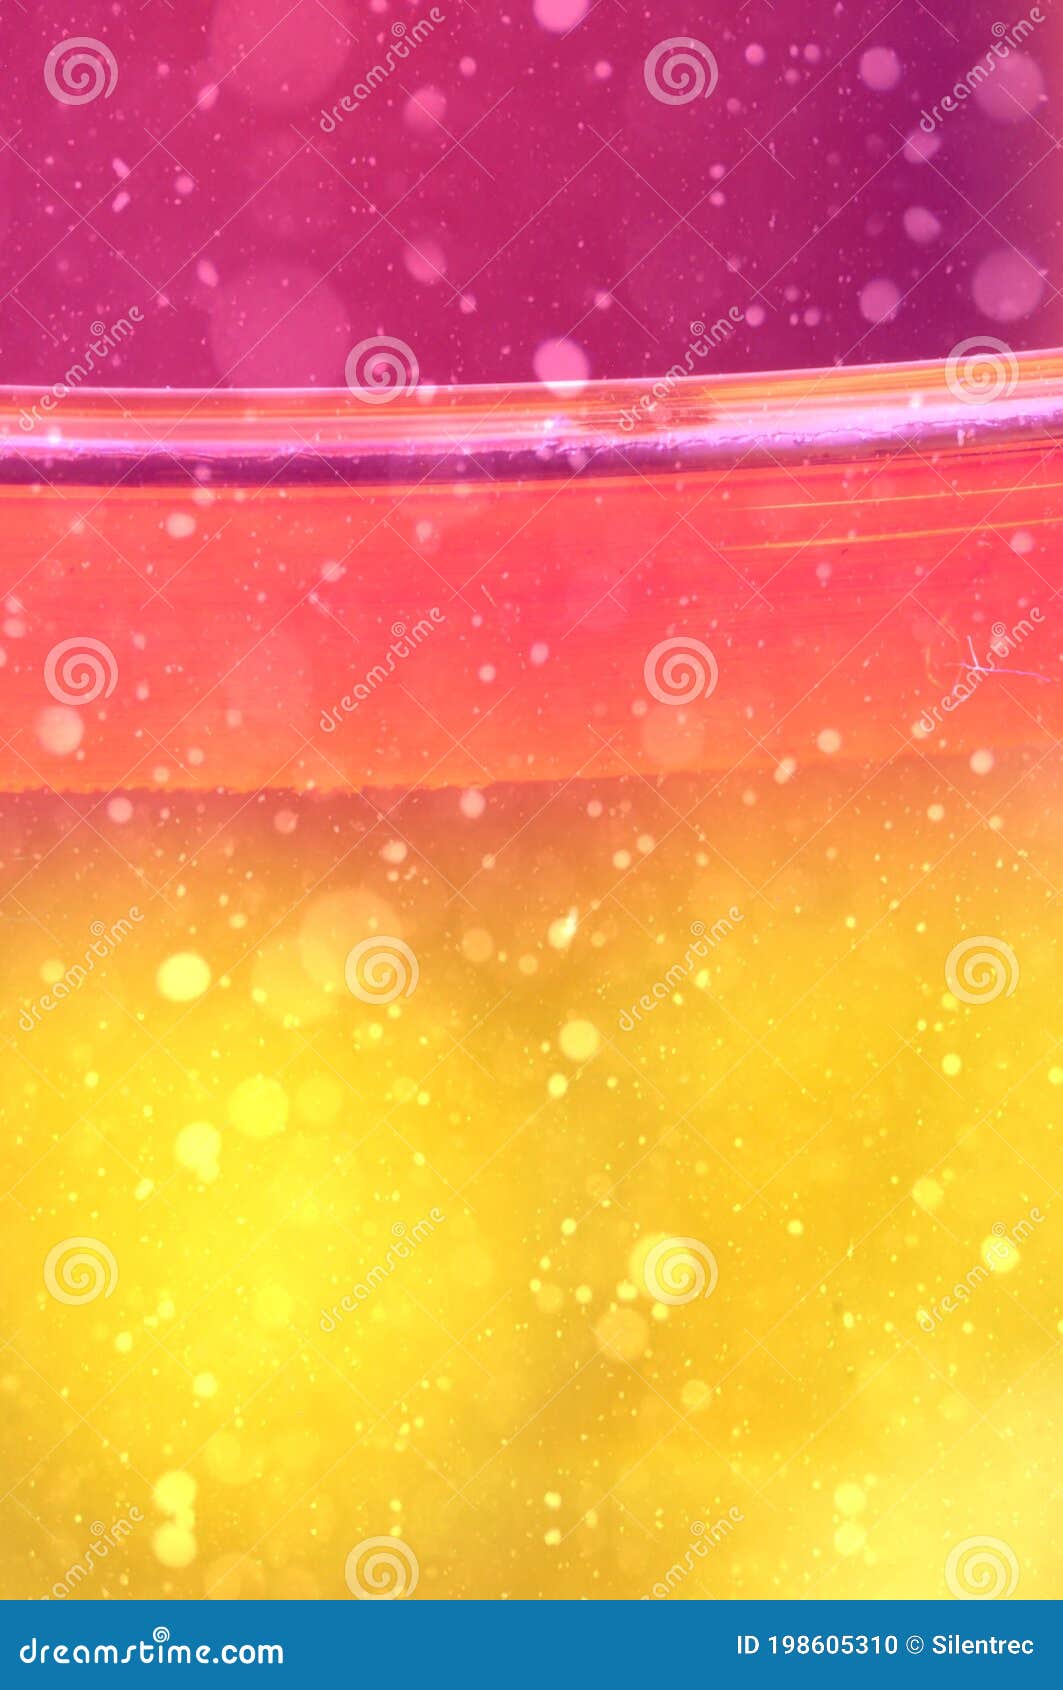 the edge of the glass in a yellow-purple glow